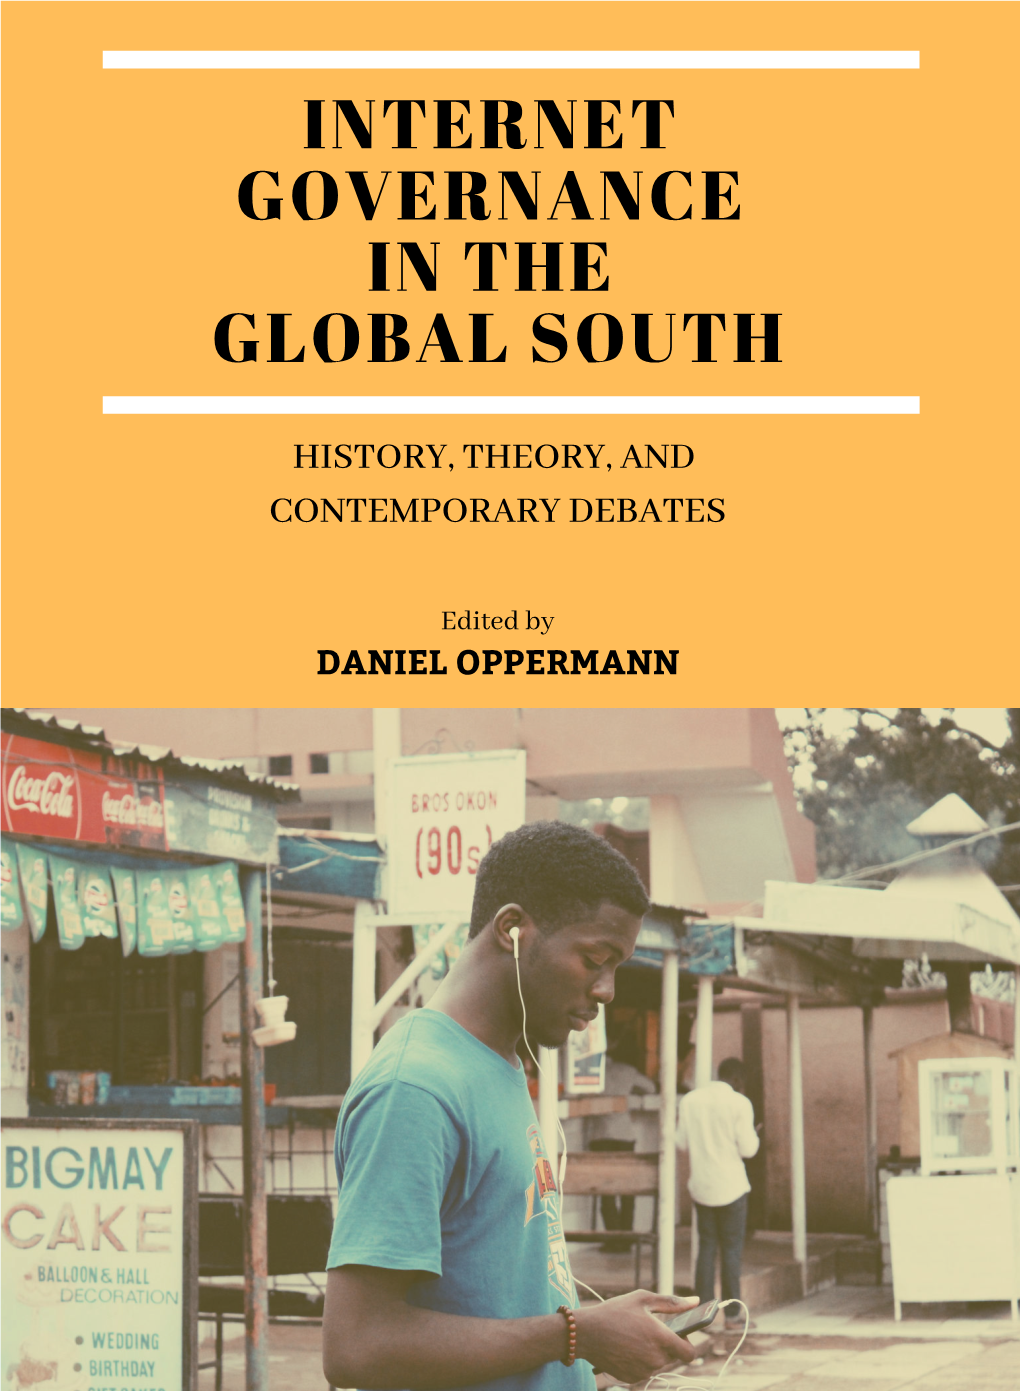 Internet Governance in the Global South